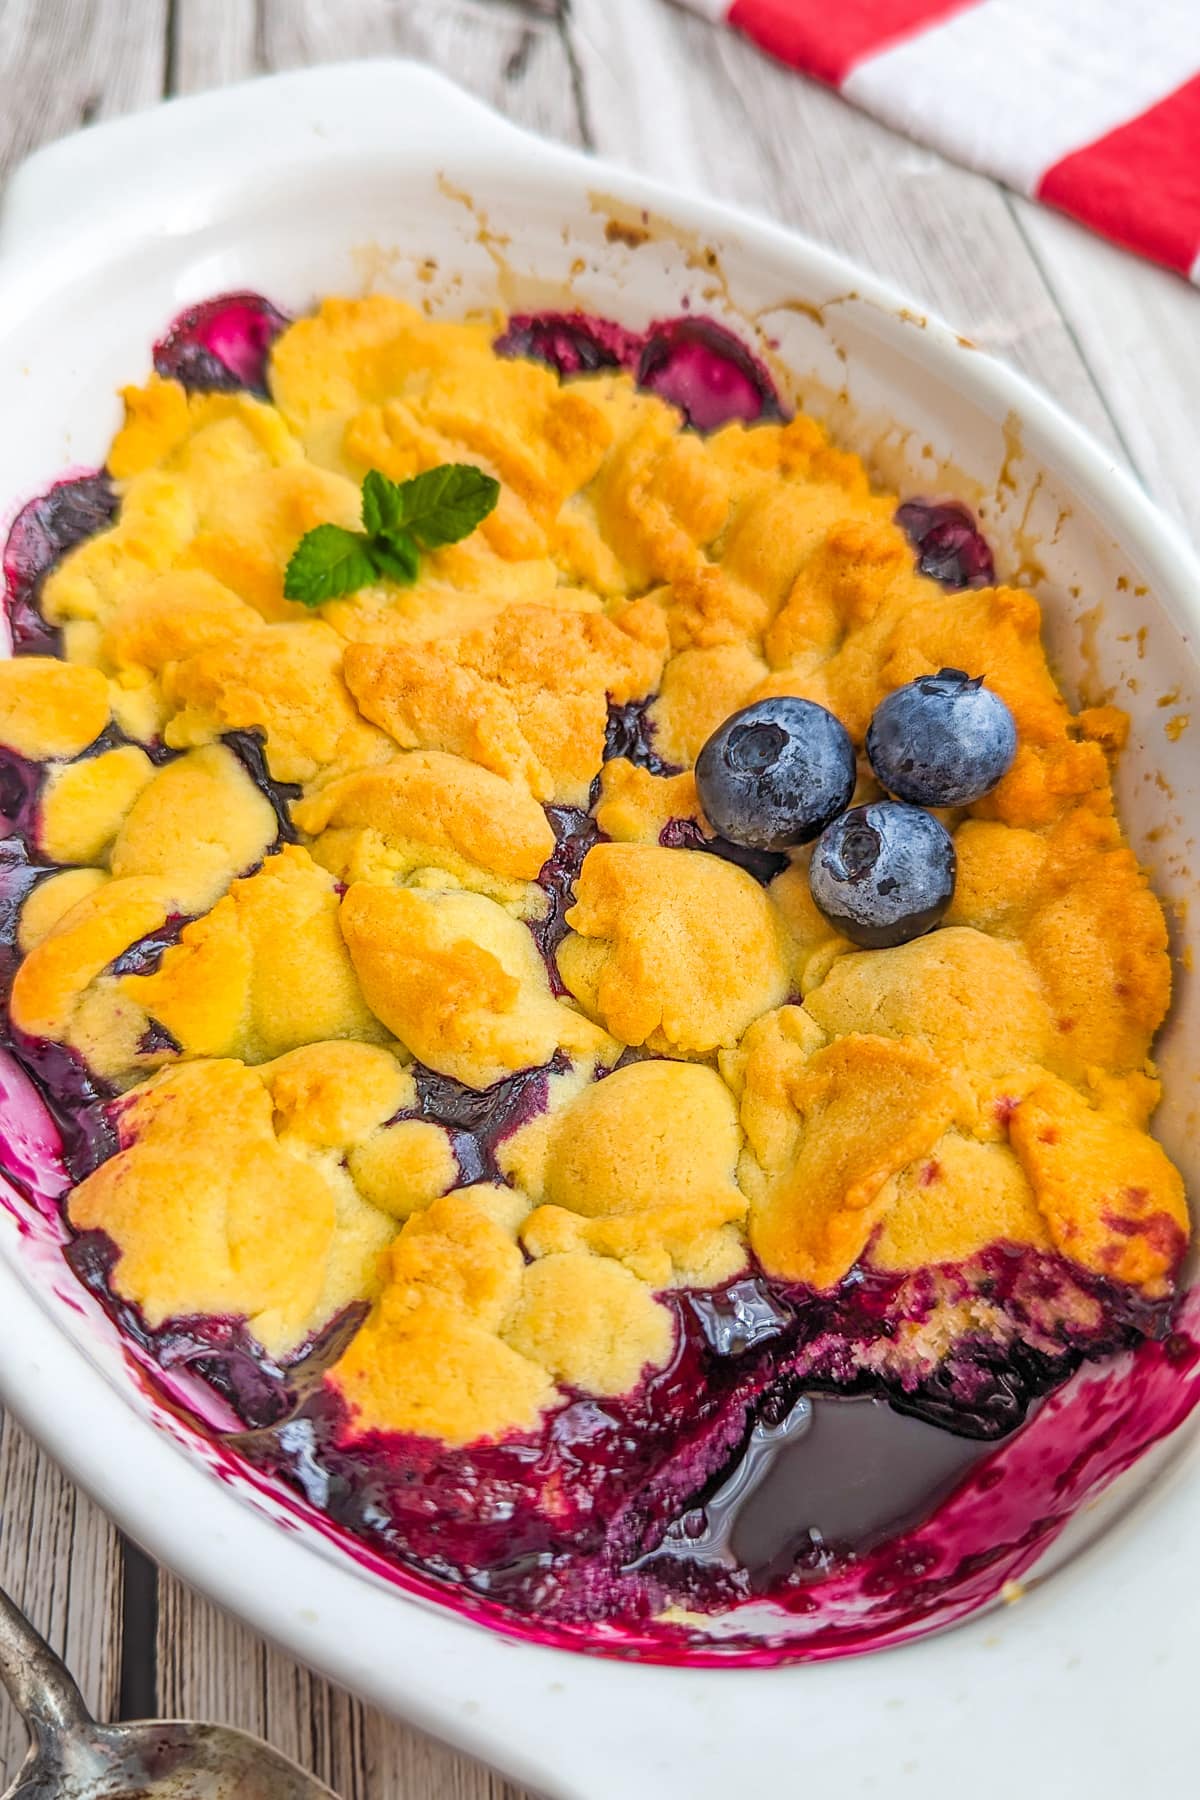 Top view of a white baking dish with blueberry cobbler in it.